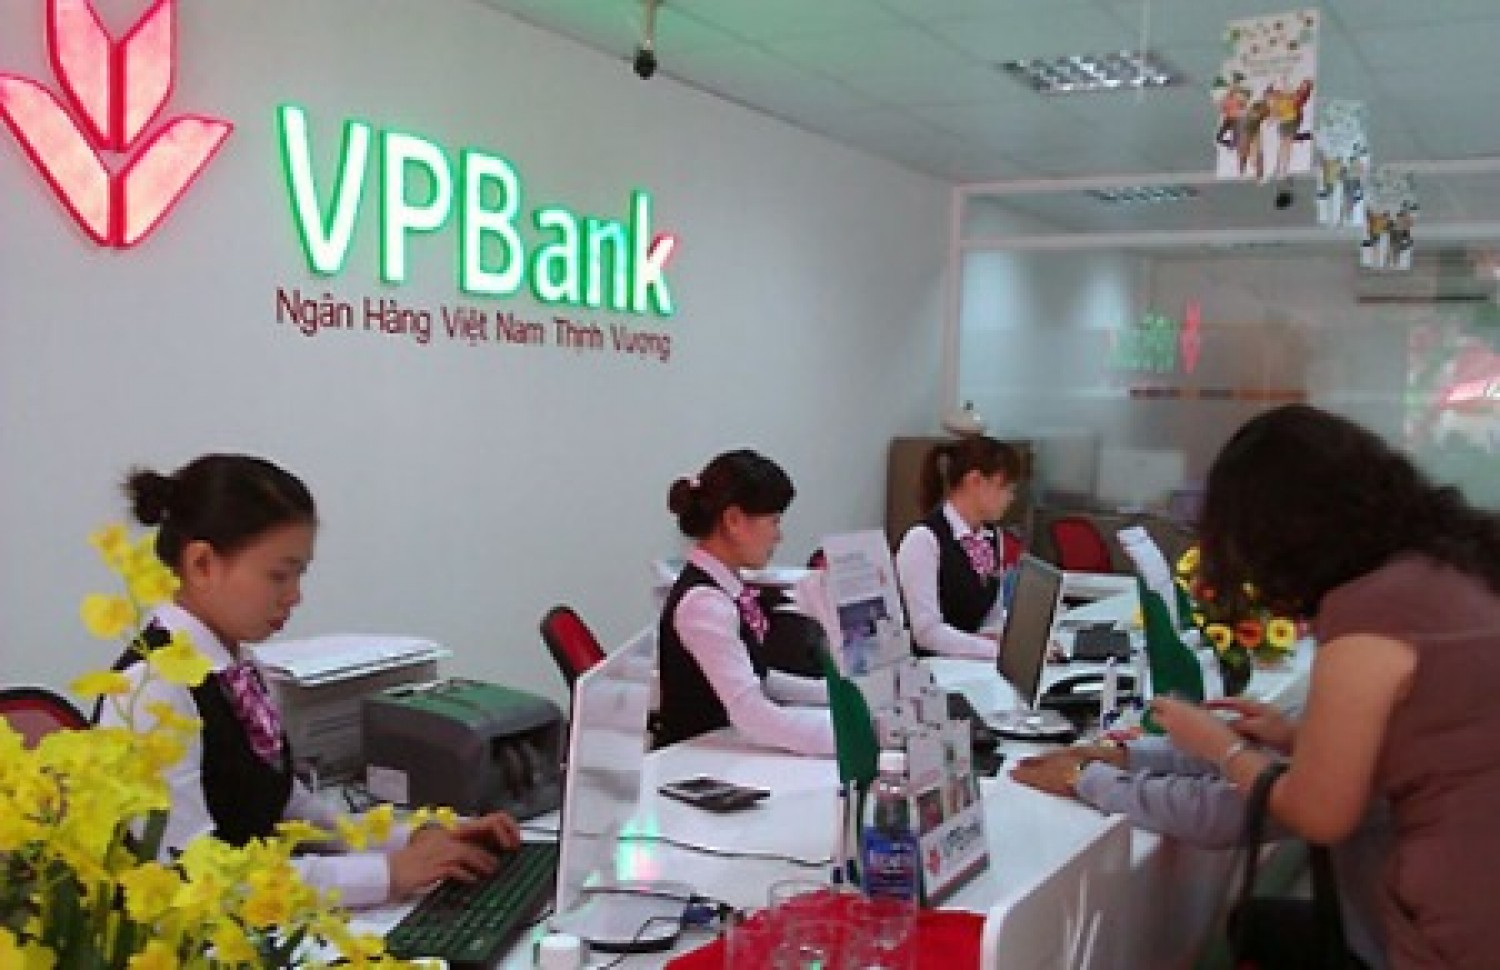 vpbank duoc thanh lap them 2 phong giao dich